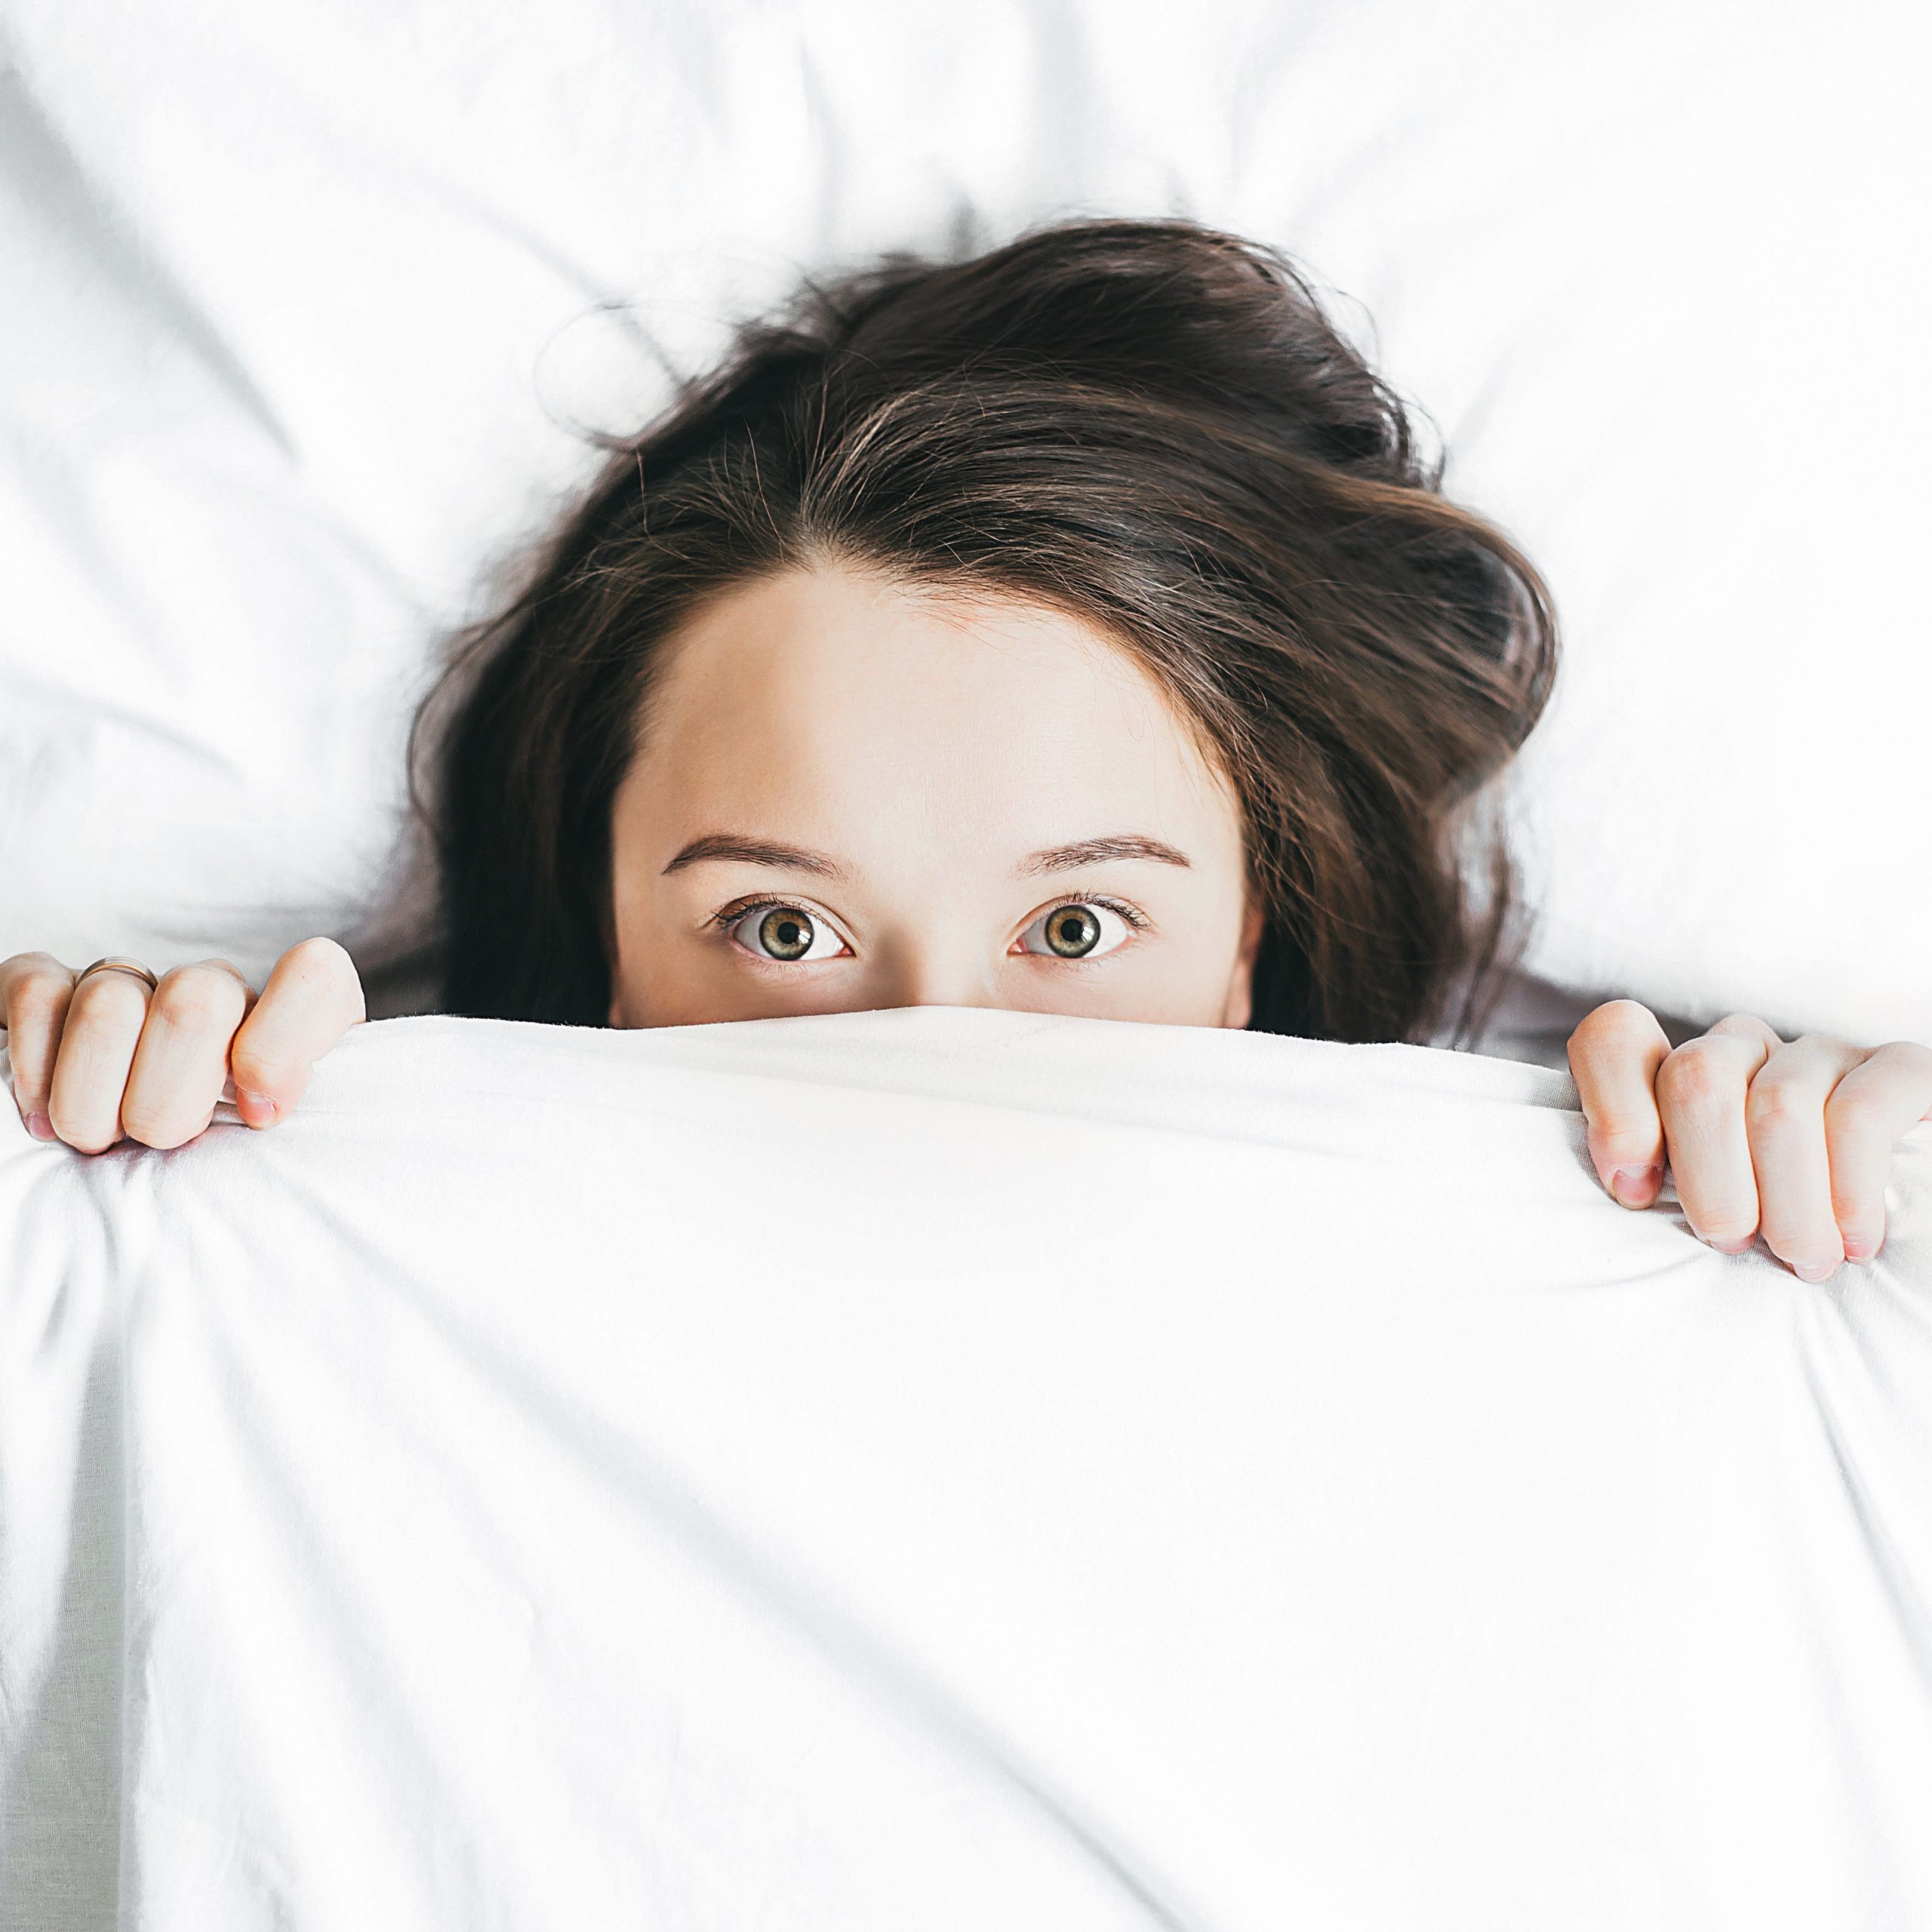 woman poking head out from under covers in bed